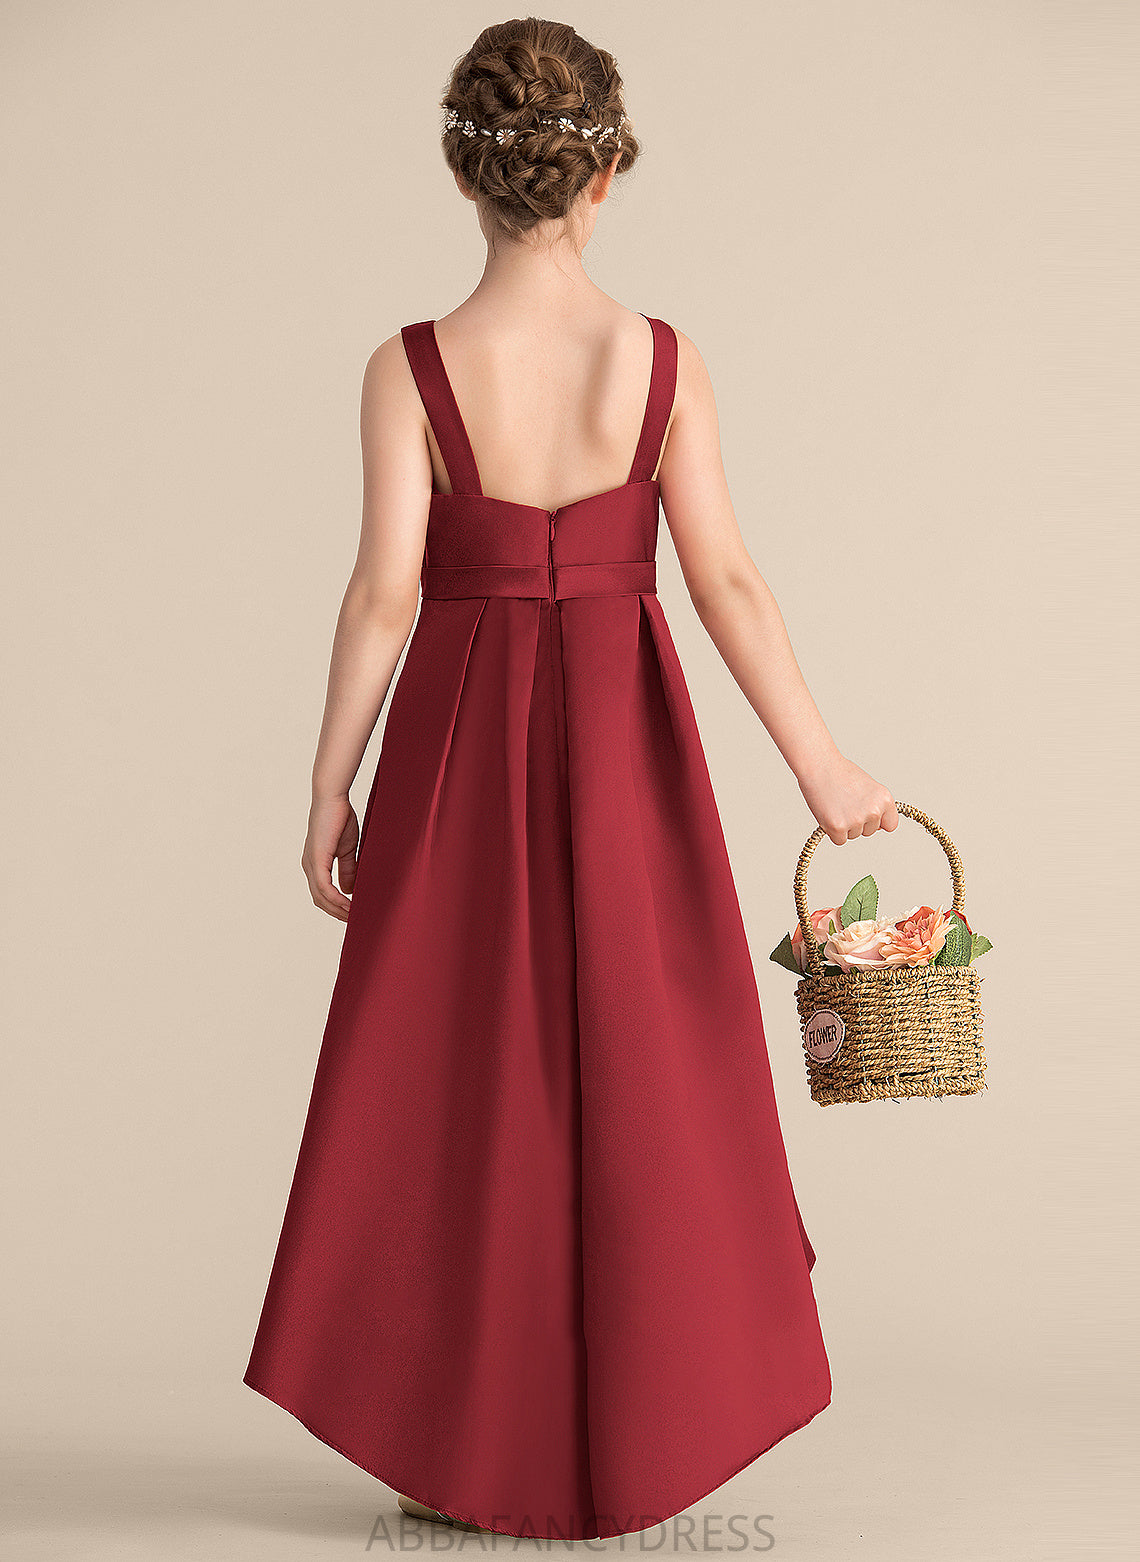 Asymmetrical Ruffle Scoop Phoebe Junior Bridesmaid Dresses With Neck Satin Pockets A-Line